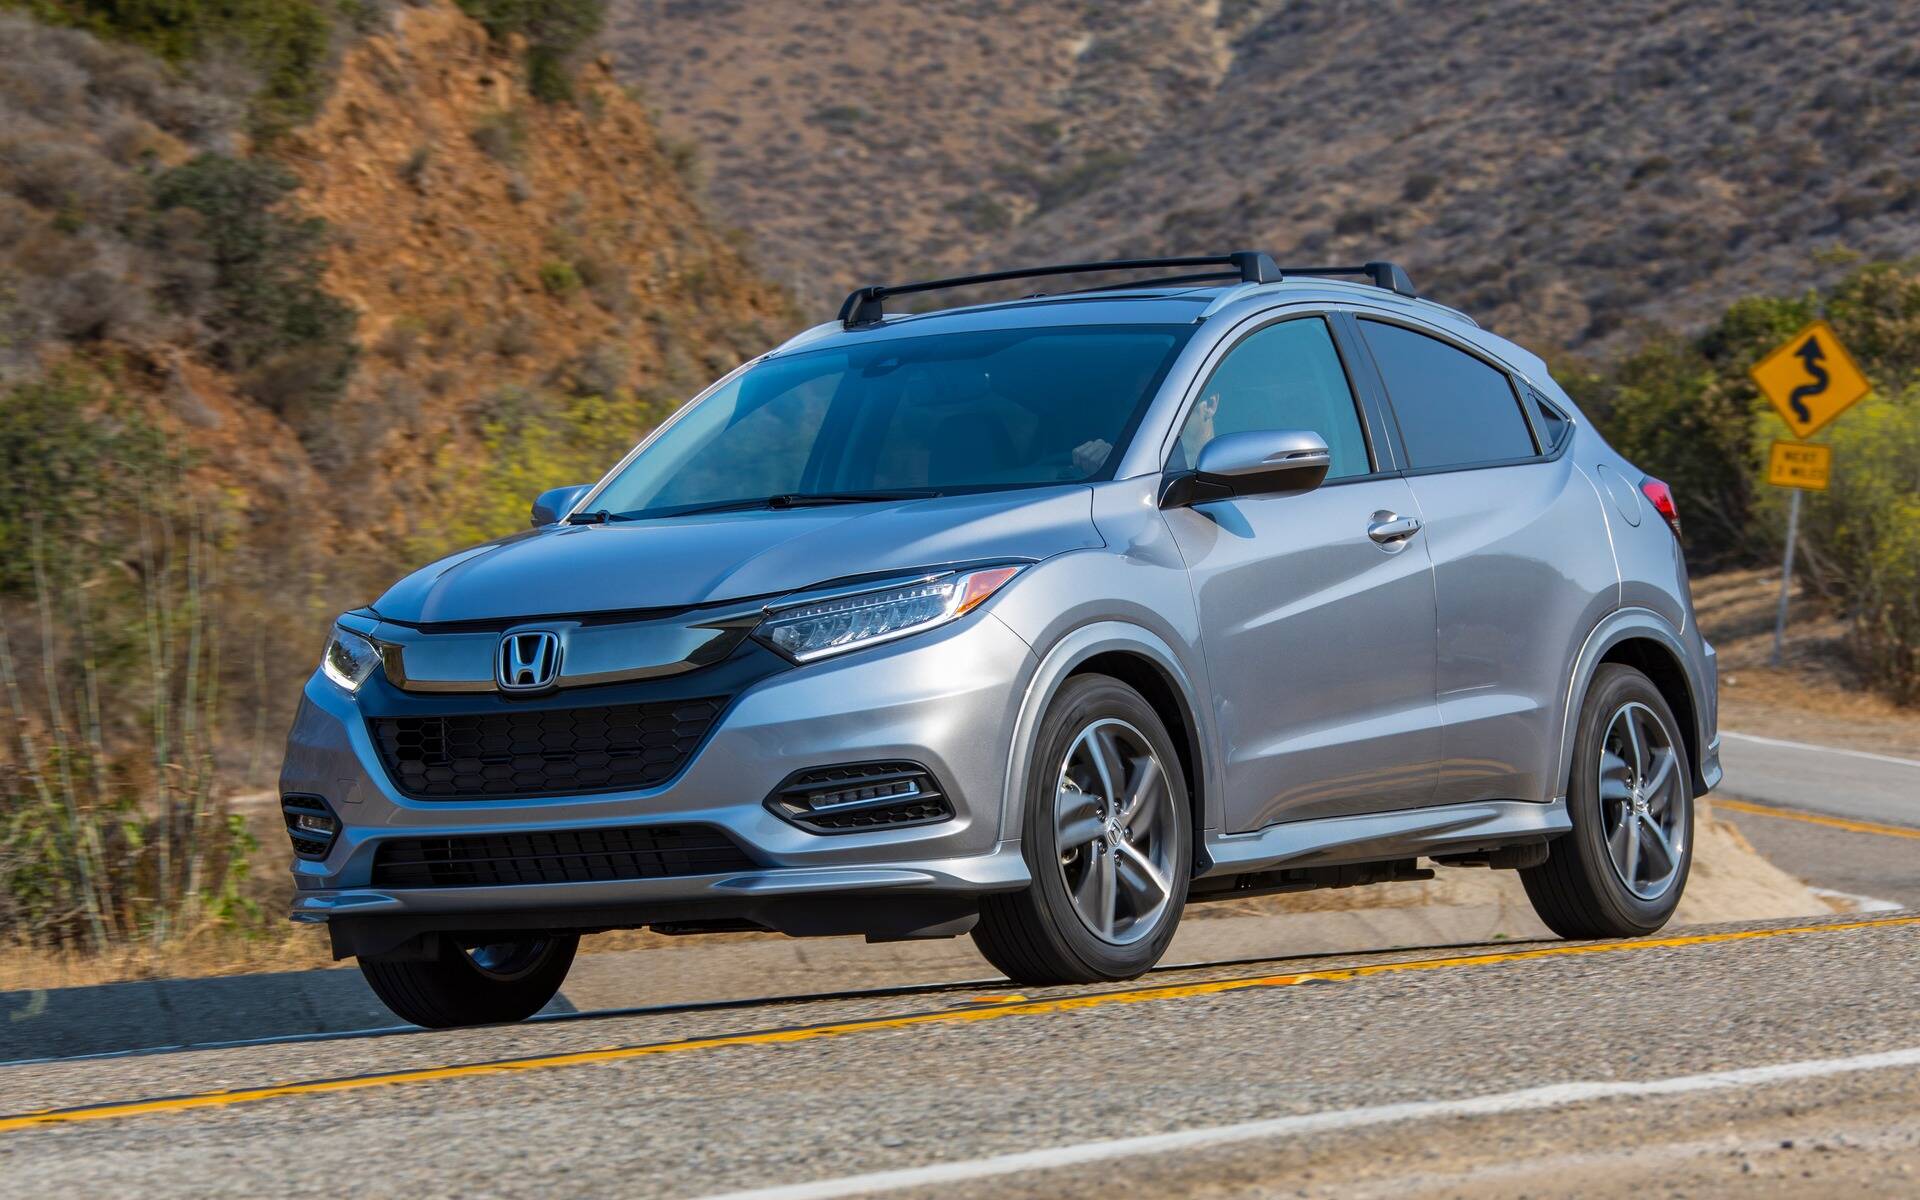 Major Recall on Honda CRV, HRV Could be Coming 3/4